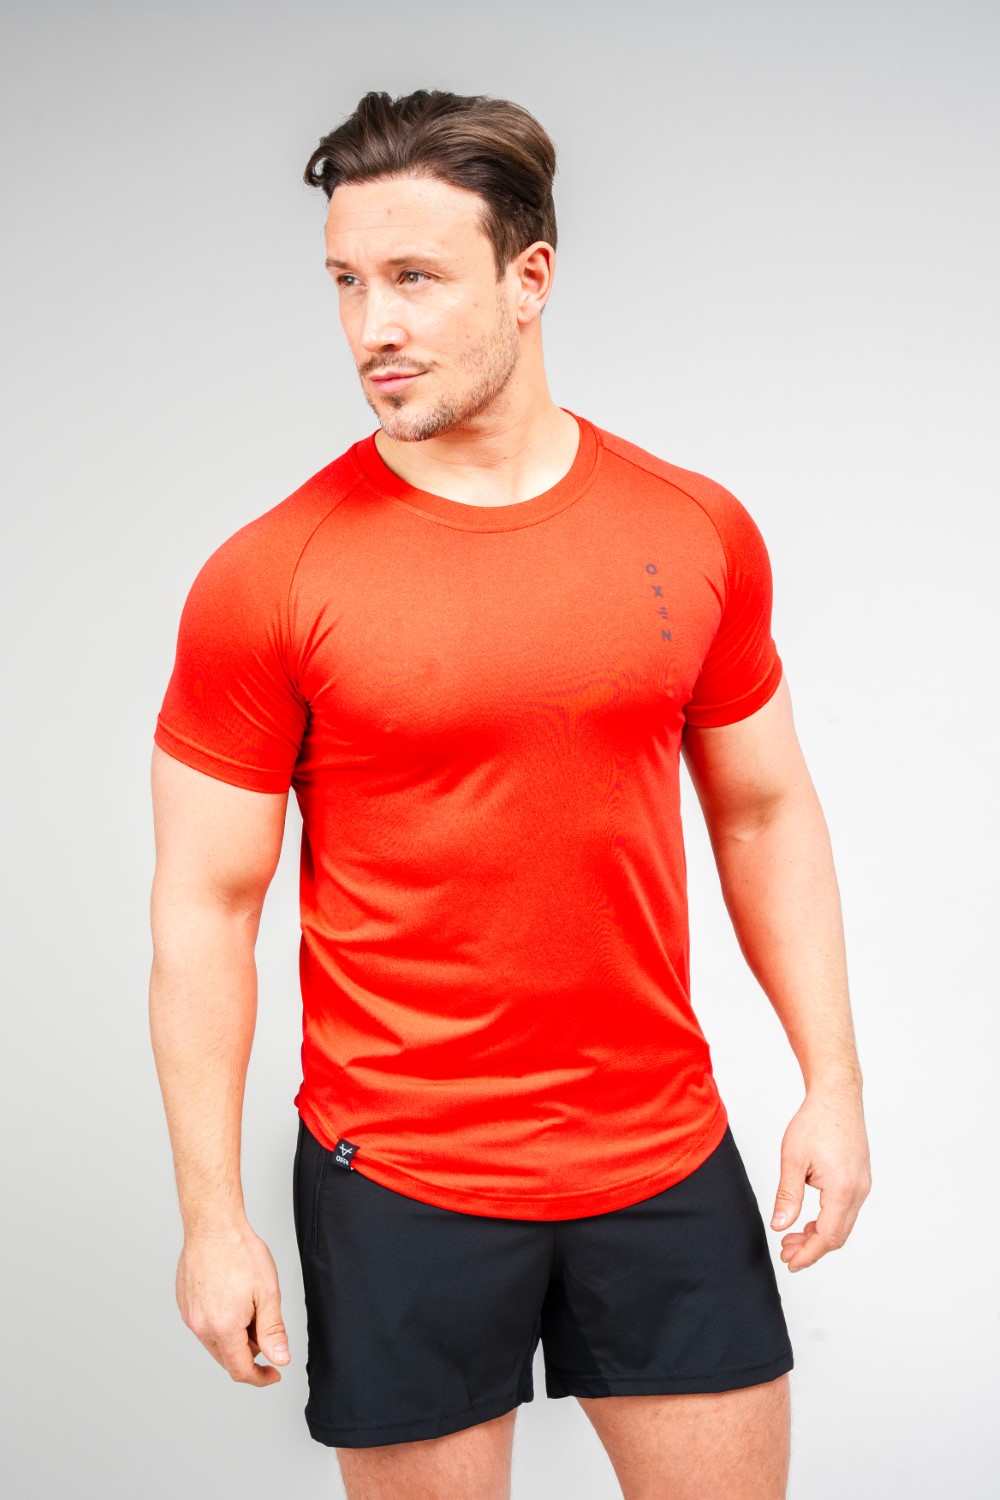 Oxen Red Performance Tee - Elite Pro Sports